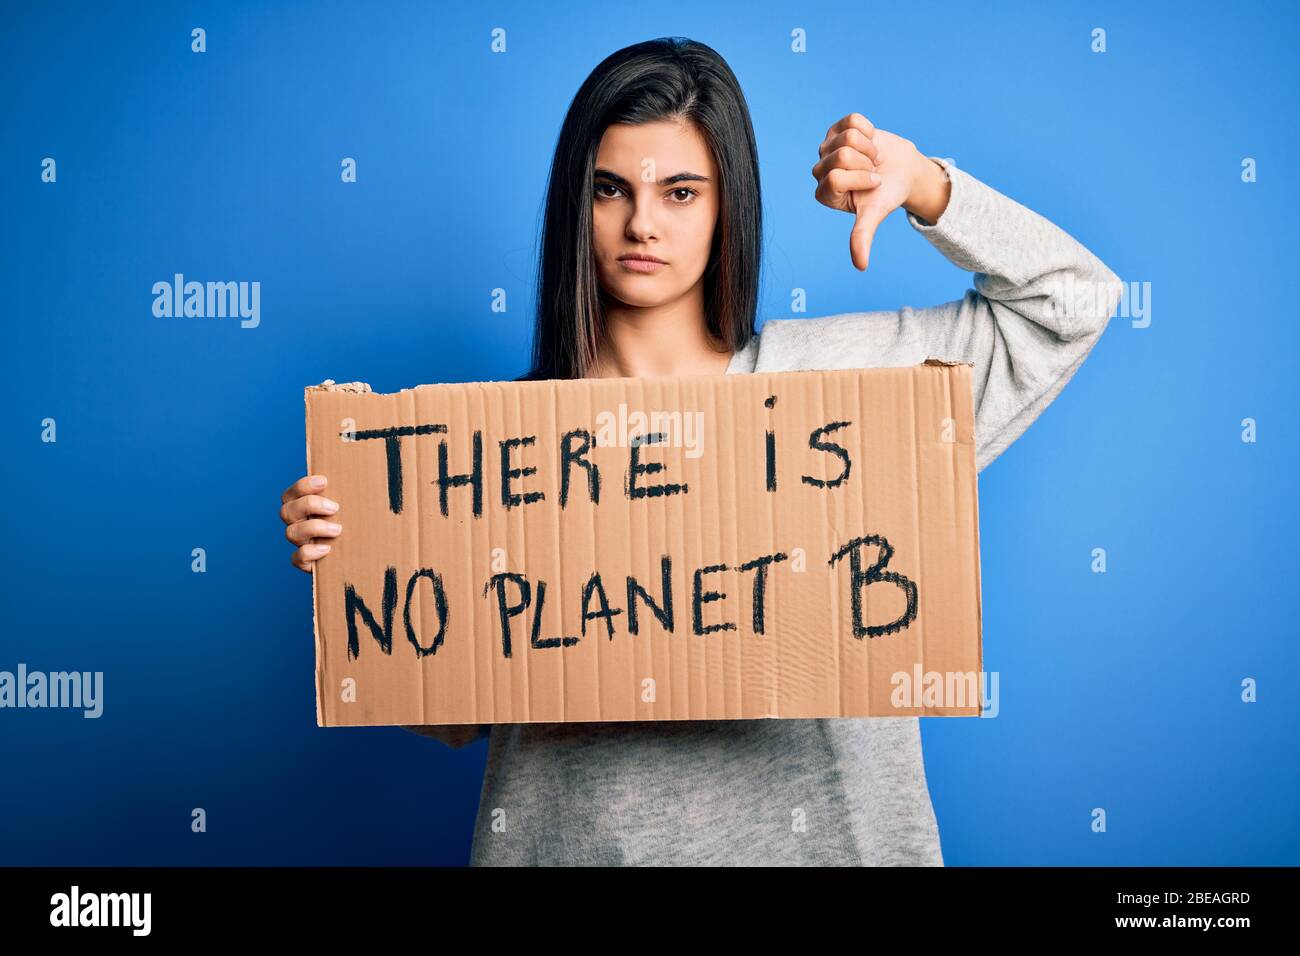 Young beautiful brunette activist woman holding banner protesting to care the planet with angry face, negative sign showing dislike with thumbs down, Stock Photo